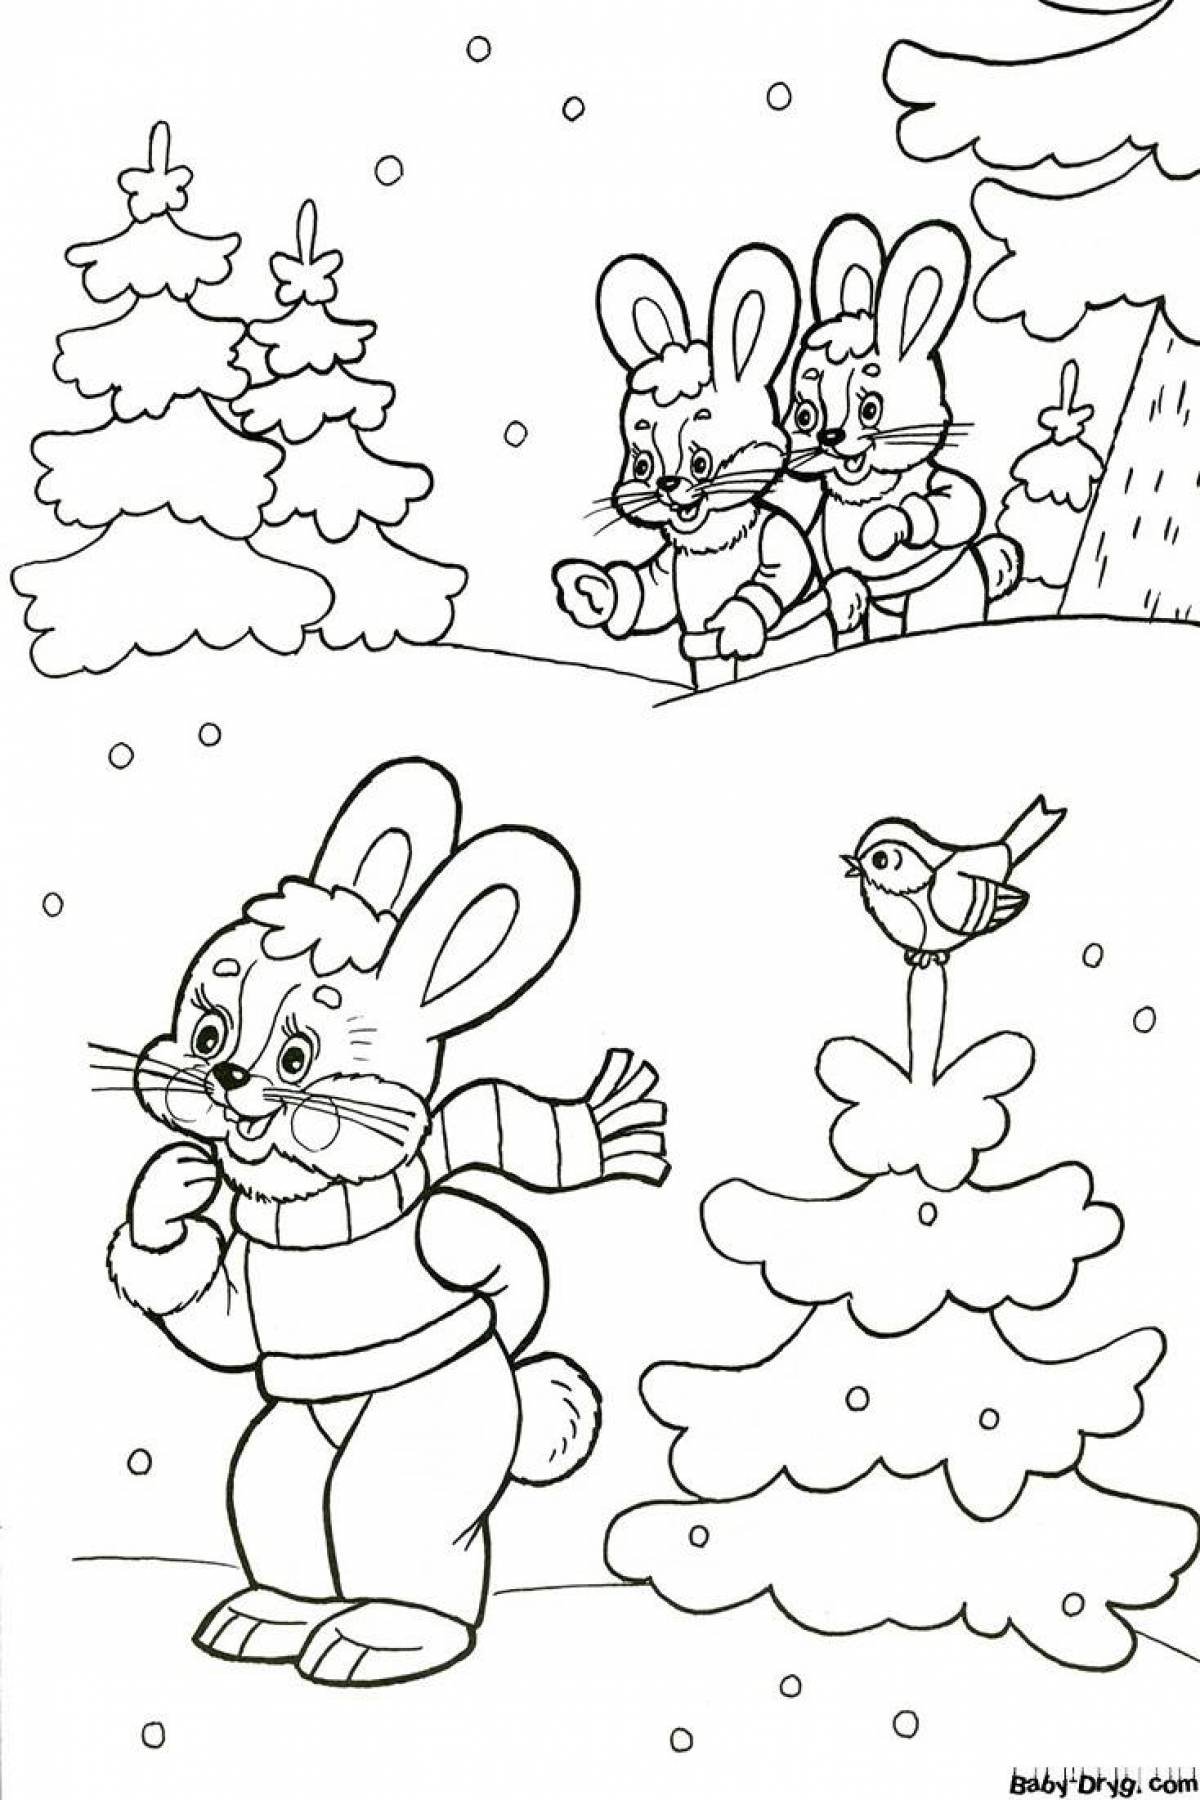 Exciting winter coloring book for kids